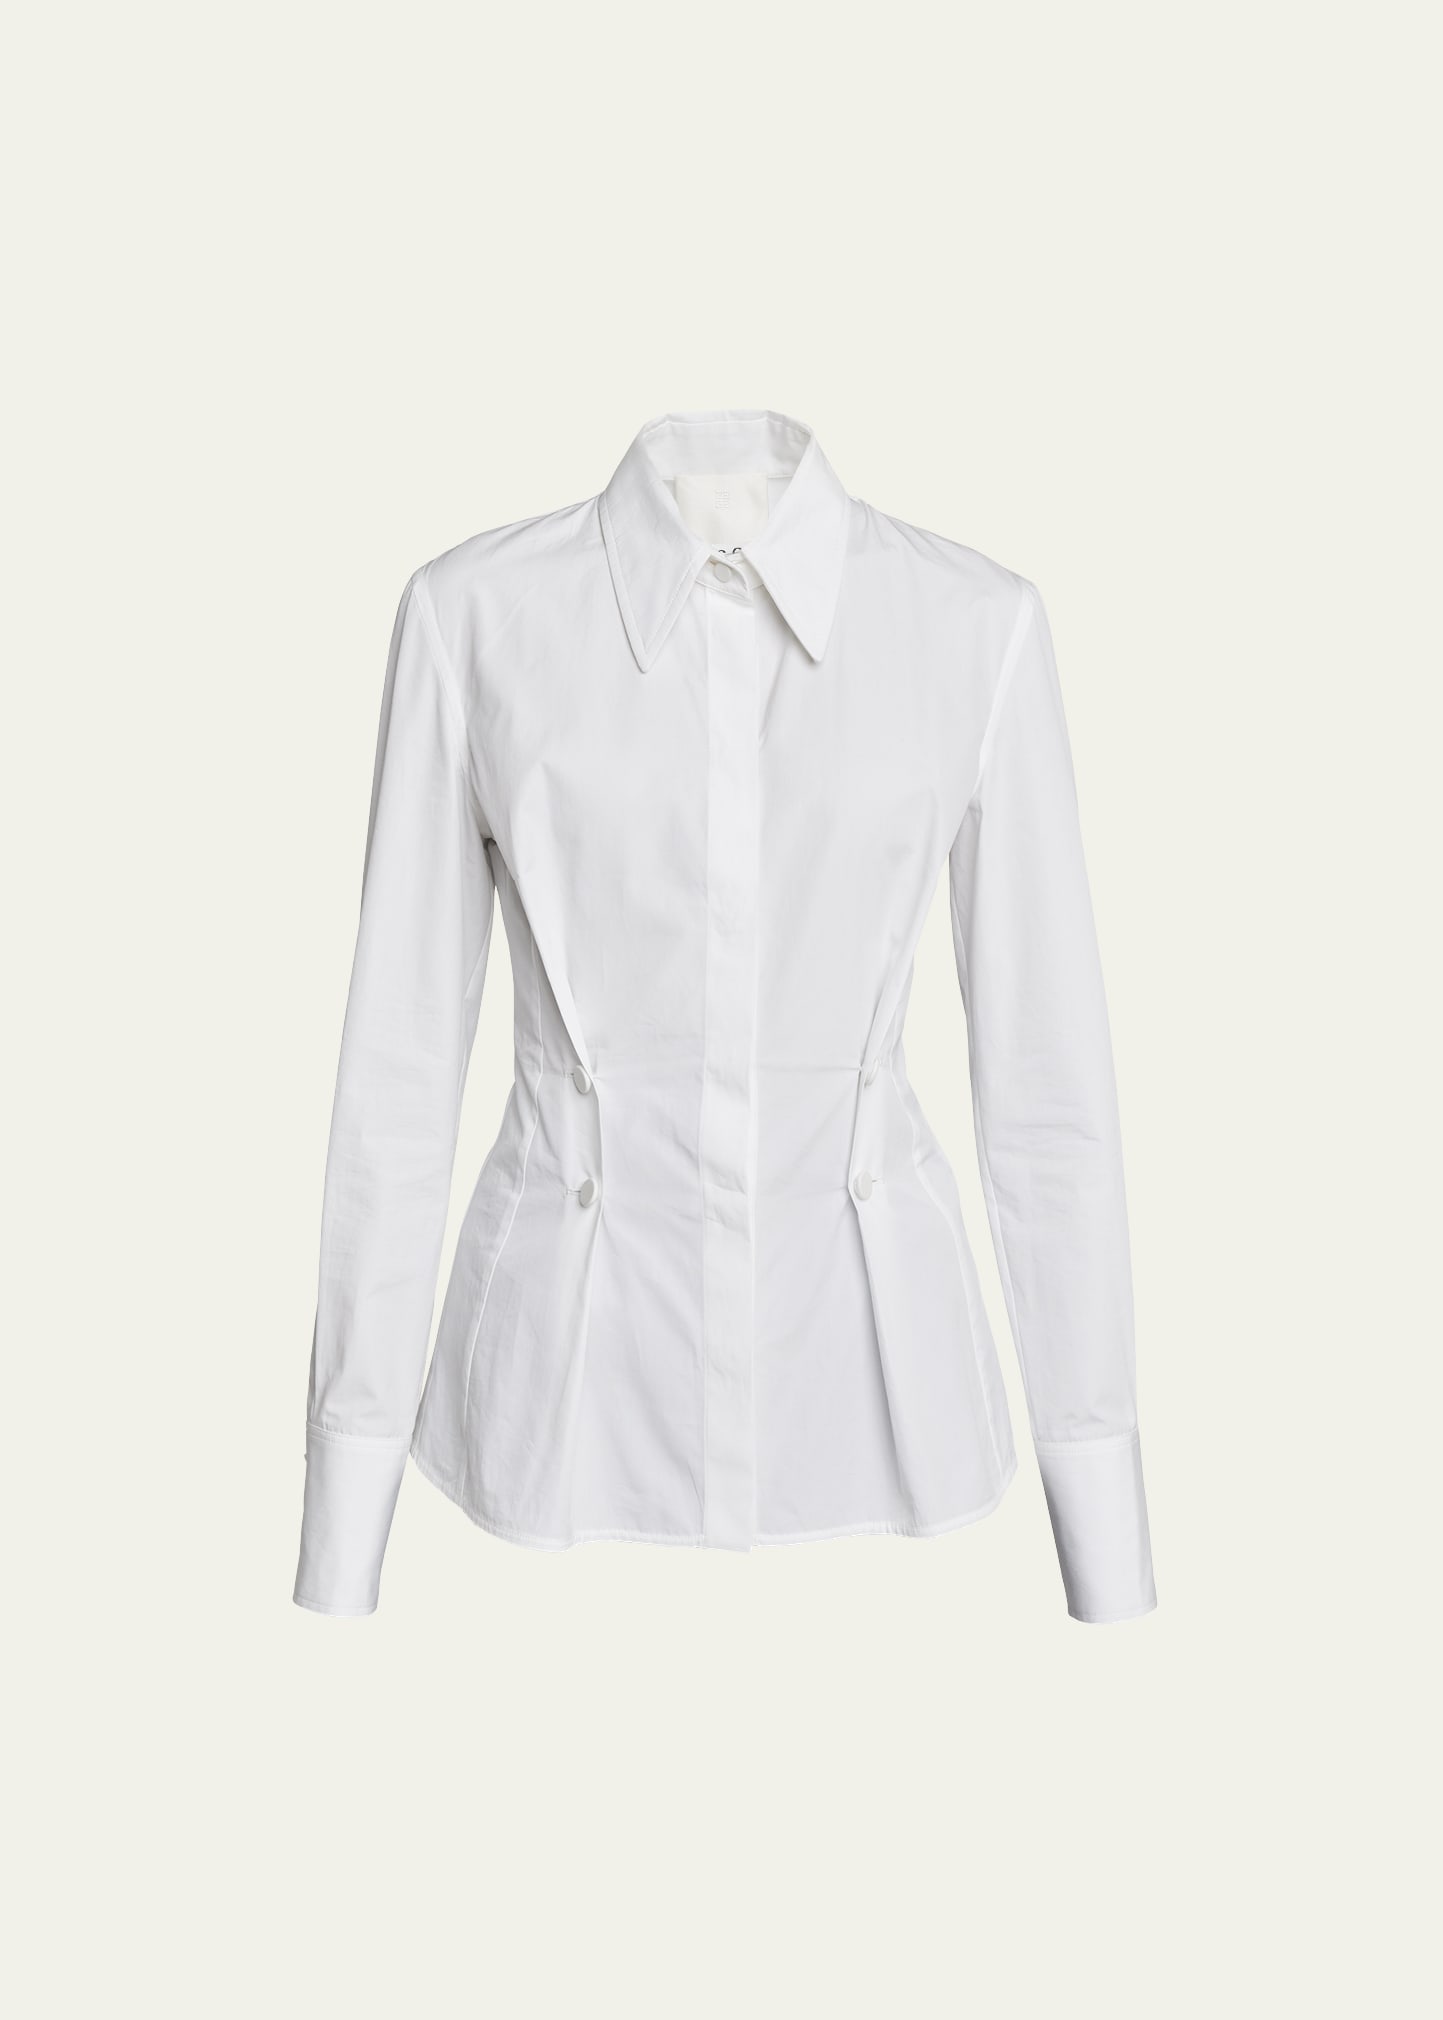 GIVENCHY POPLIN BUTTON-FRONT SHIRT WITH SIDE-PLEATED DETAIL